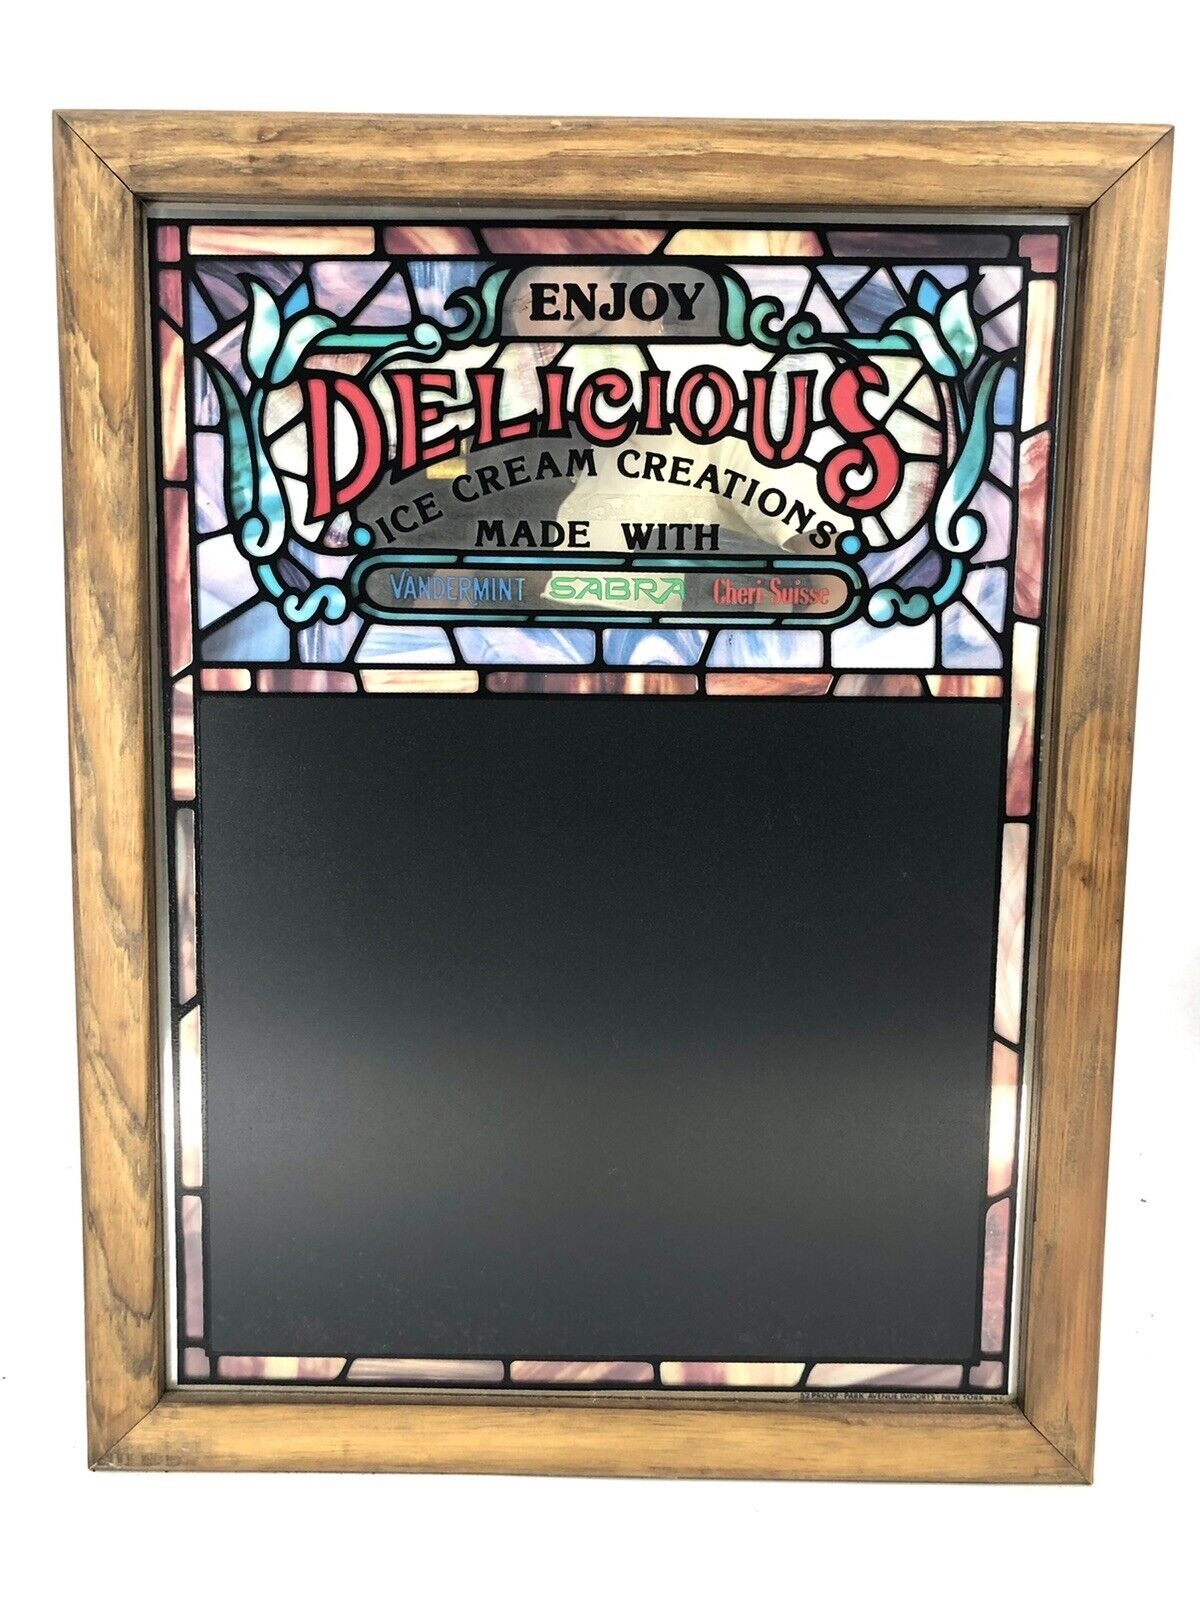 Vintage Ice Cream Parlor Sign Stained Glass Style - Built In Chalkboard